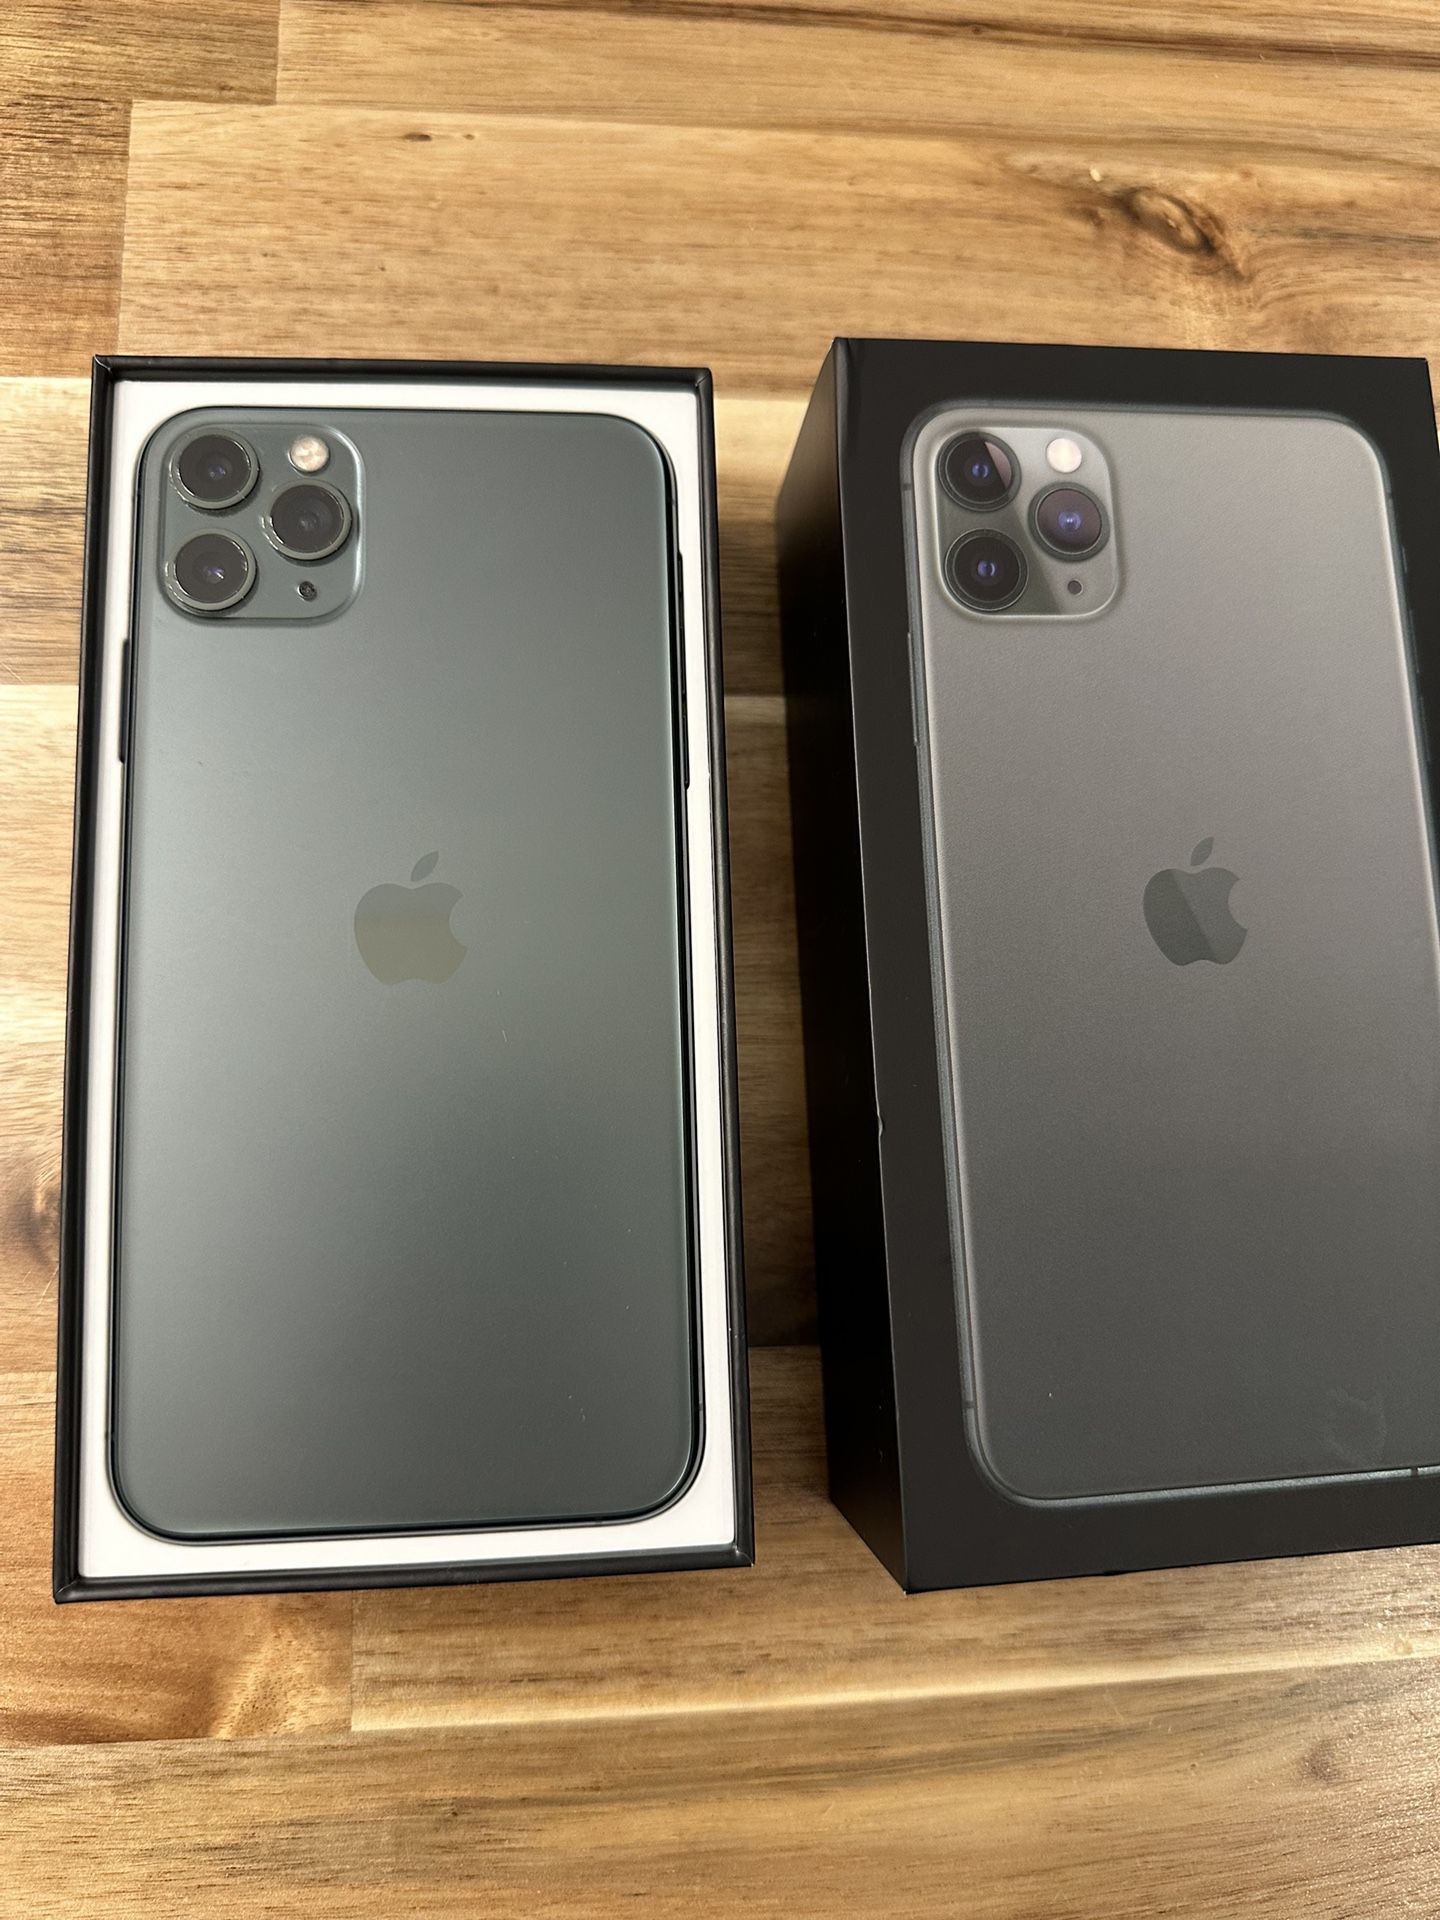 iPhone 11 Pro Max 64GB Unlocked For Any Company✅Price Firm✅